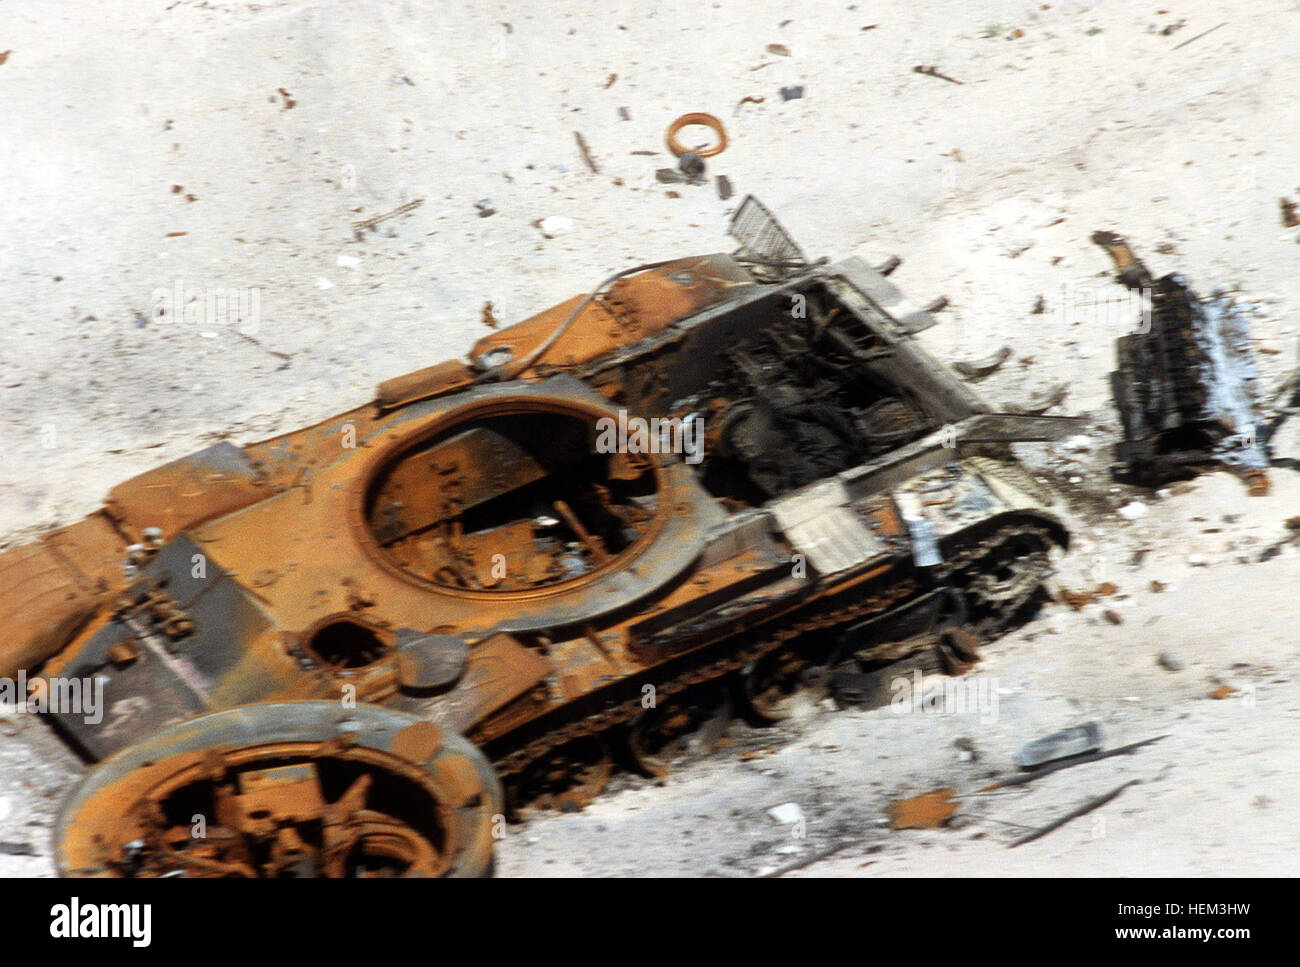 An Iraqi tank destroyed during Operation Desert Storm. Destroyed Iraqi T-54, T-55 or Type 59 tank Stock Photo